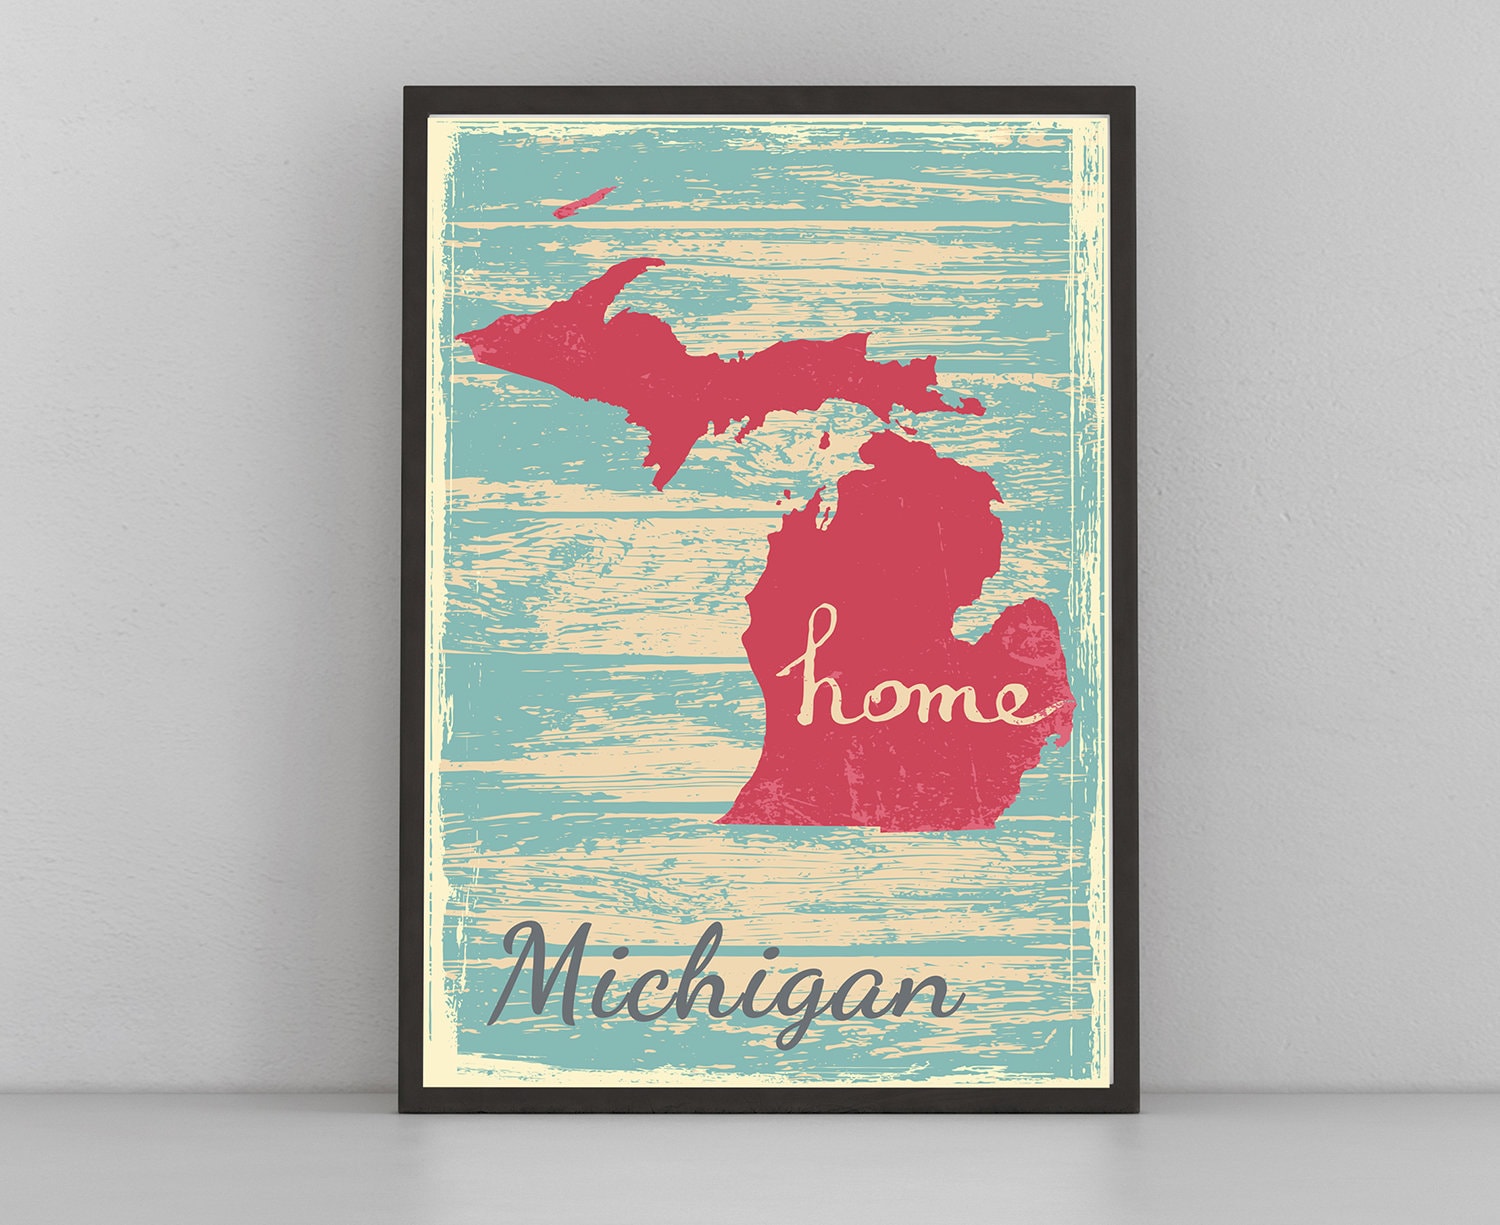 Retro Style Travel Poster, Michigan Vintage State Poster Printing, Home Wall Art, Office Wall  Decor, Poster Prints, Michigan State Poster